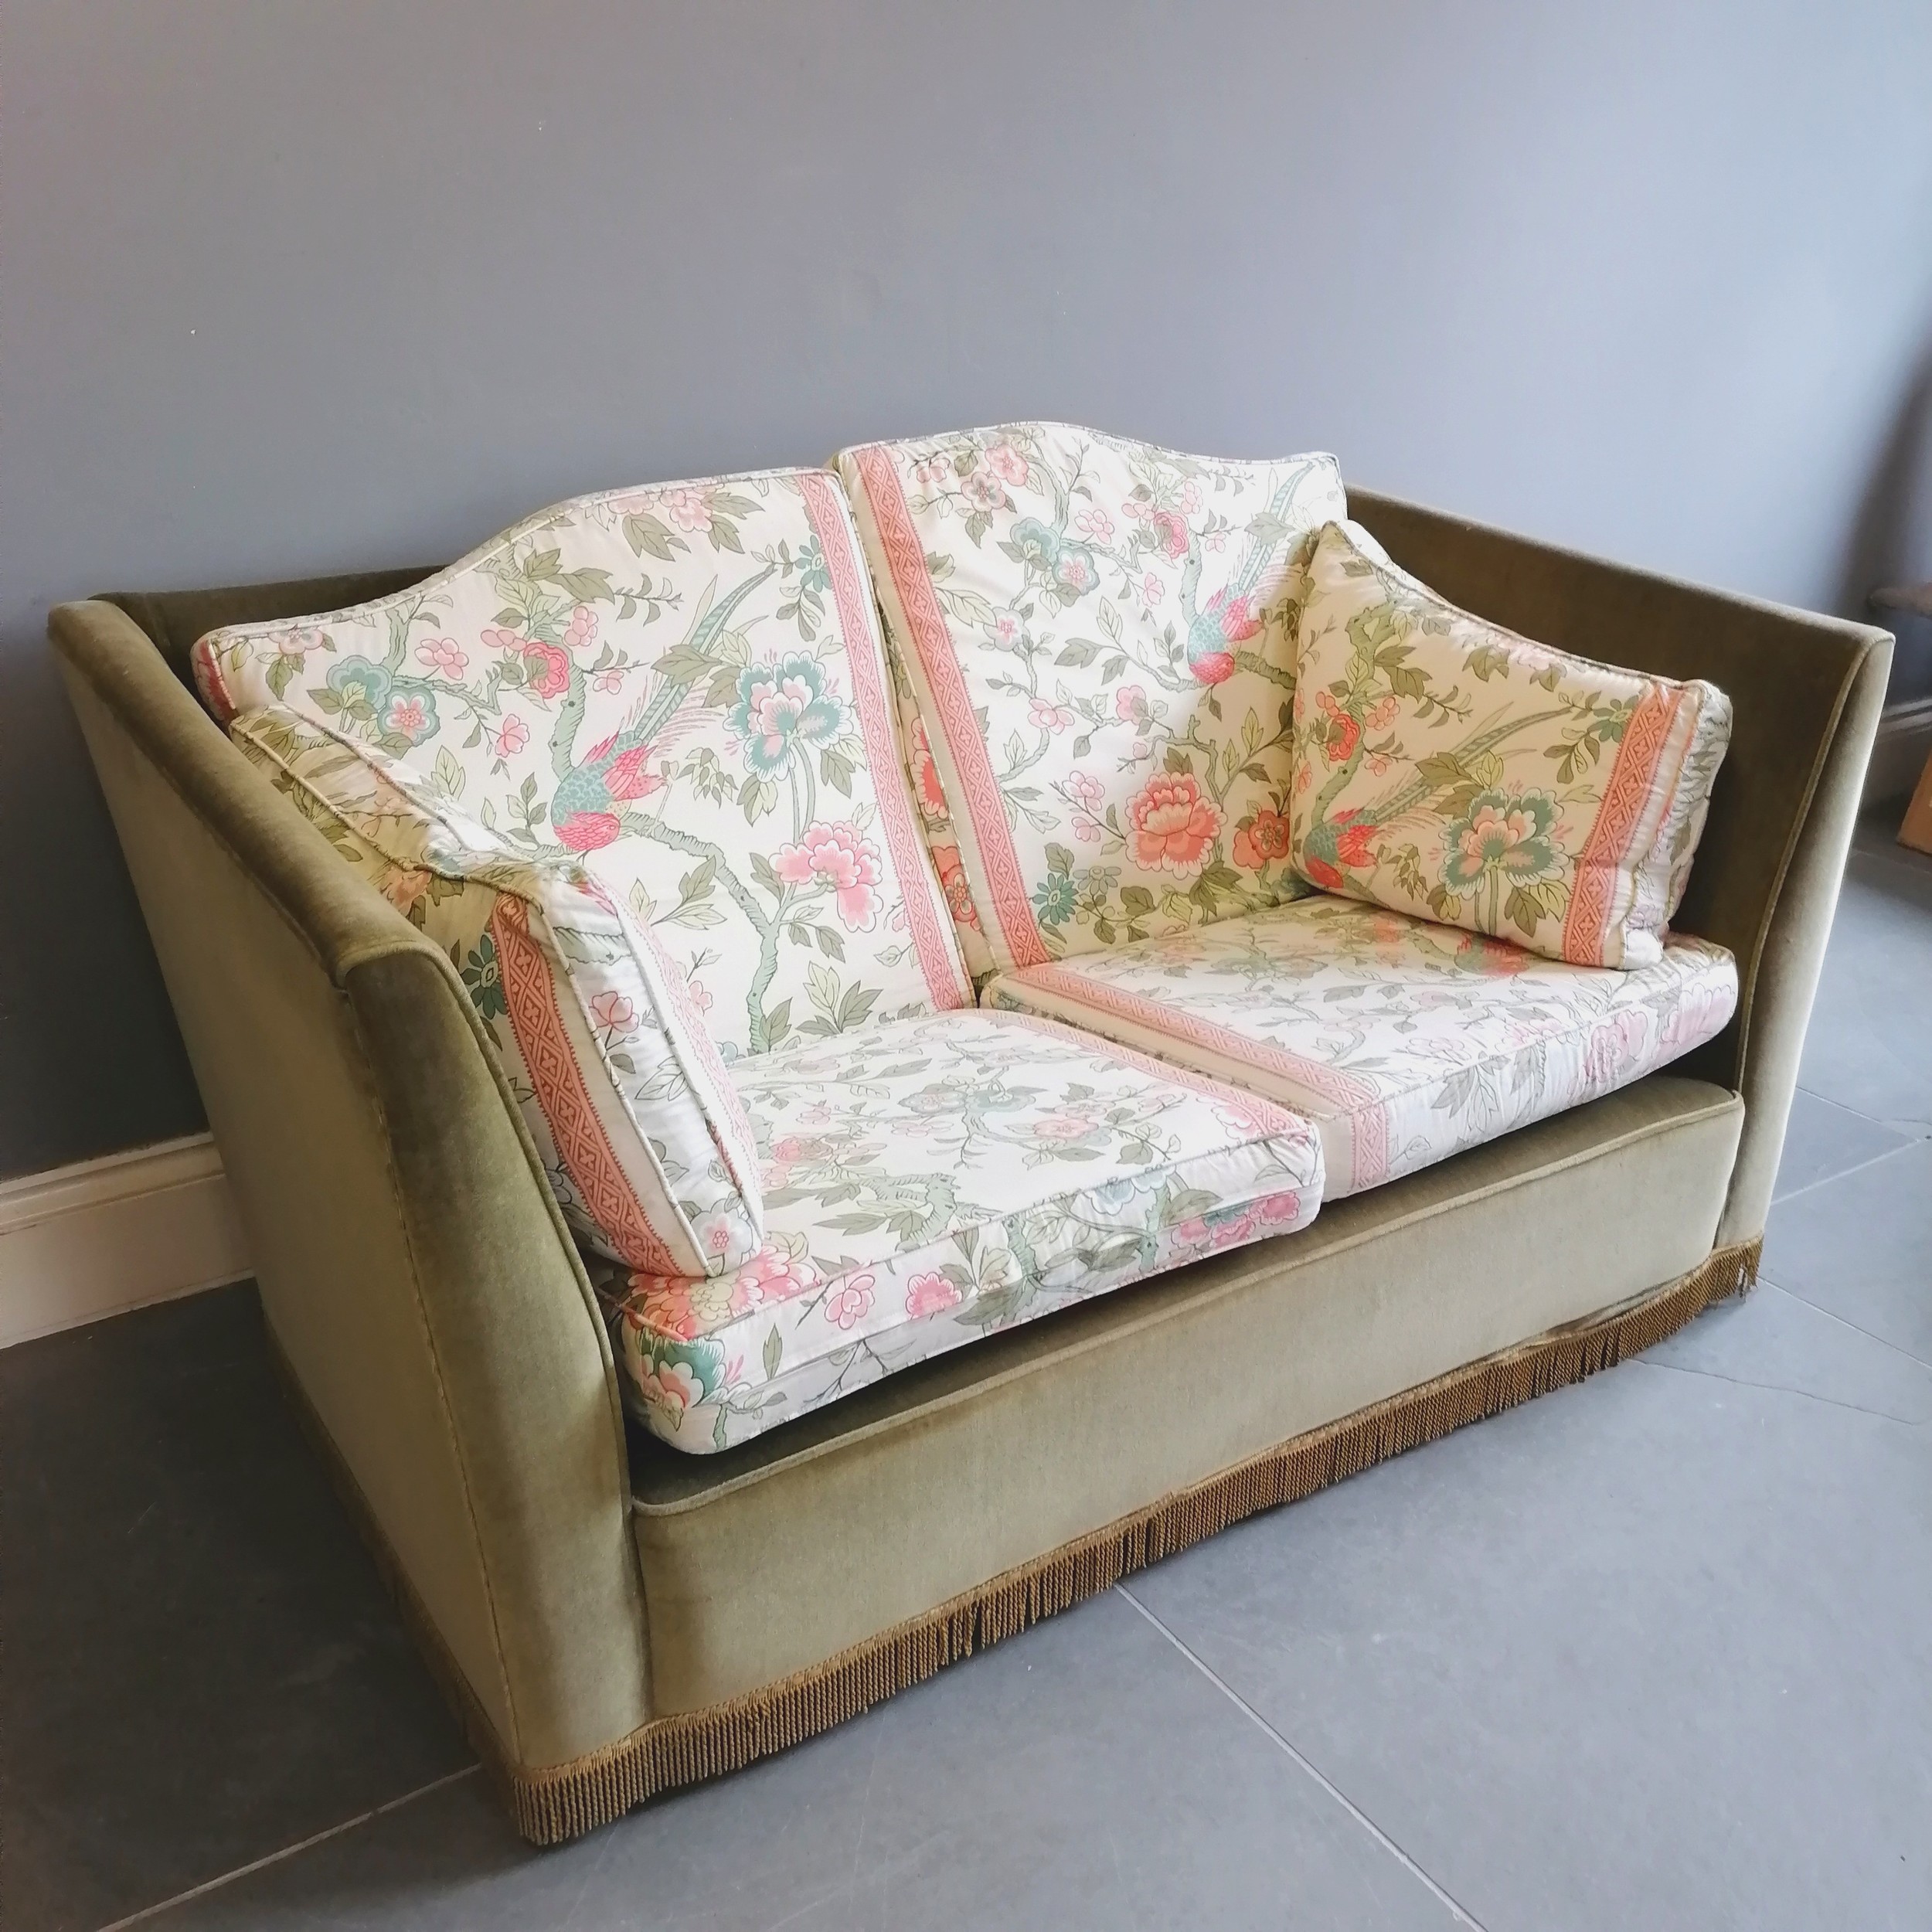 Knowle style 2 seater settee, upholstered in a green plush with Jane Churchill floral and exotic - Image 3 of 3